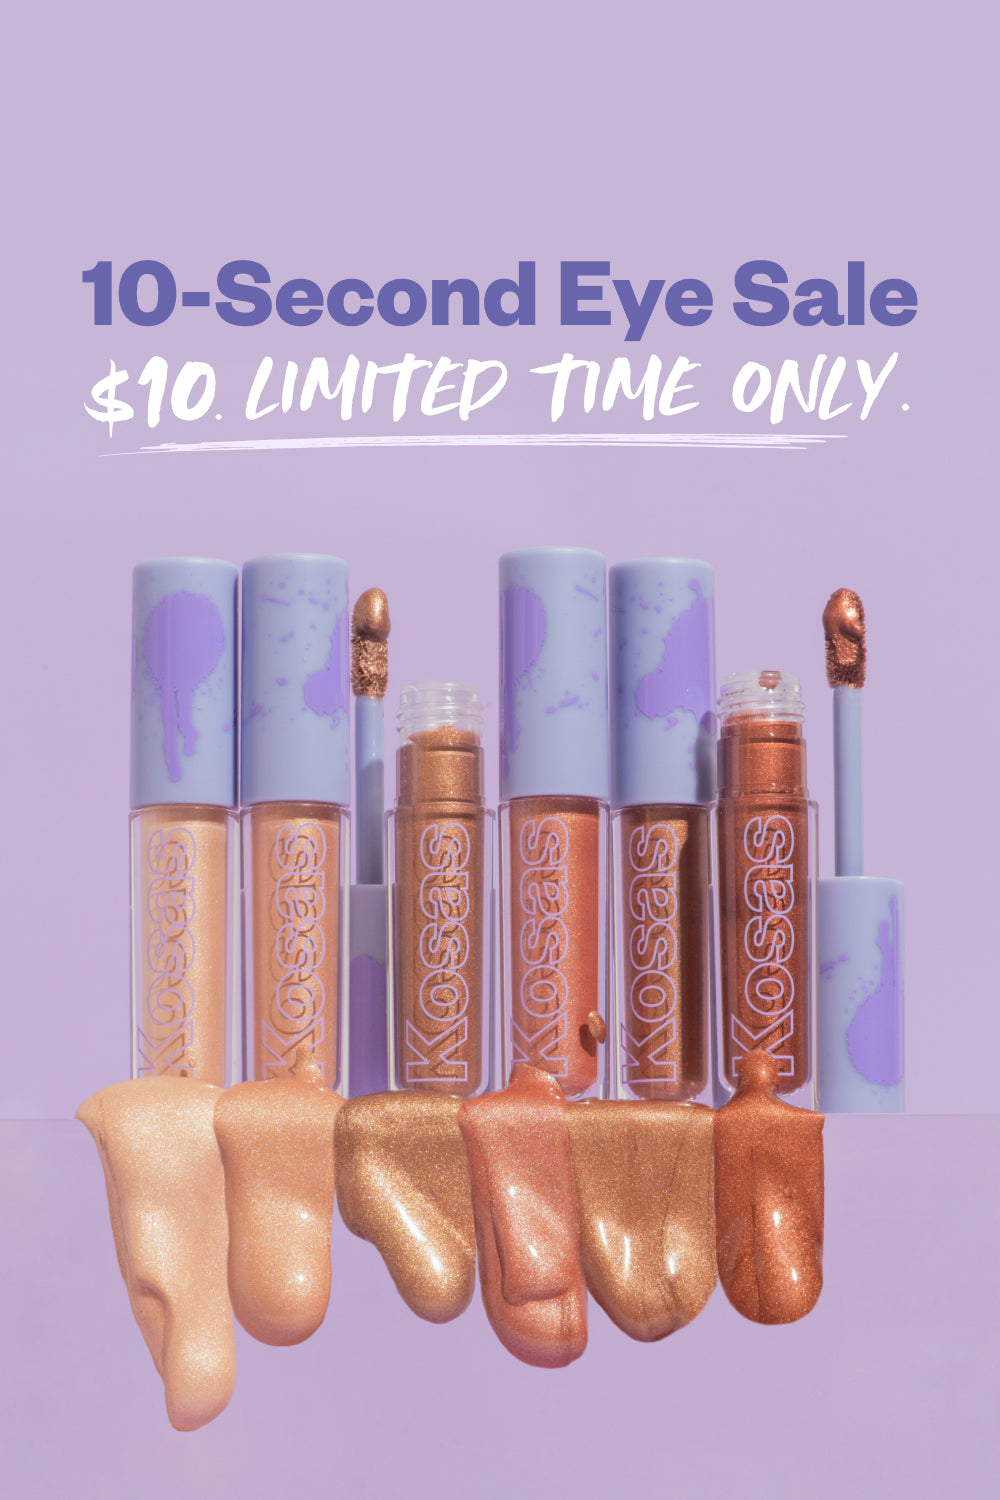 10-second eye sale $10 limited time only